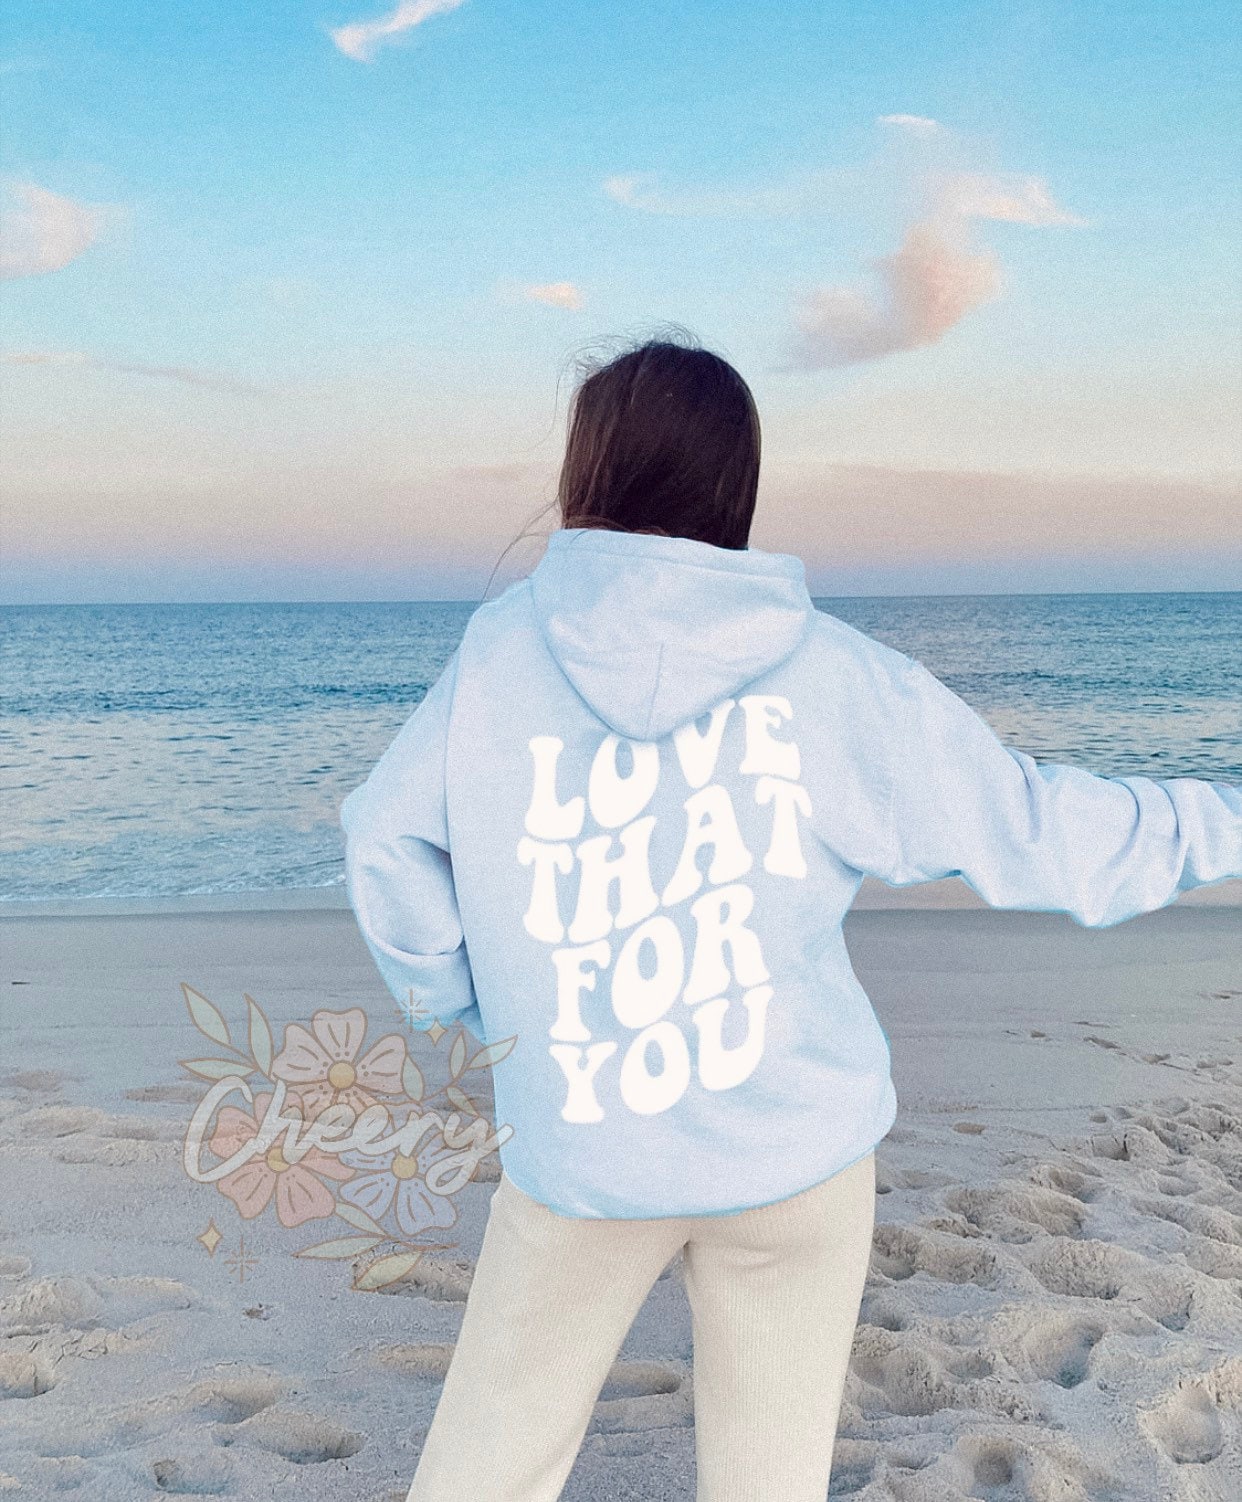 Tumblr Hoodie Aesthetic Hoodies Trendy Oversized Love That For You